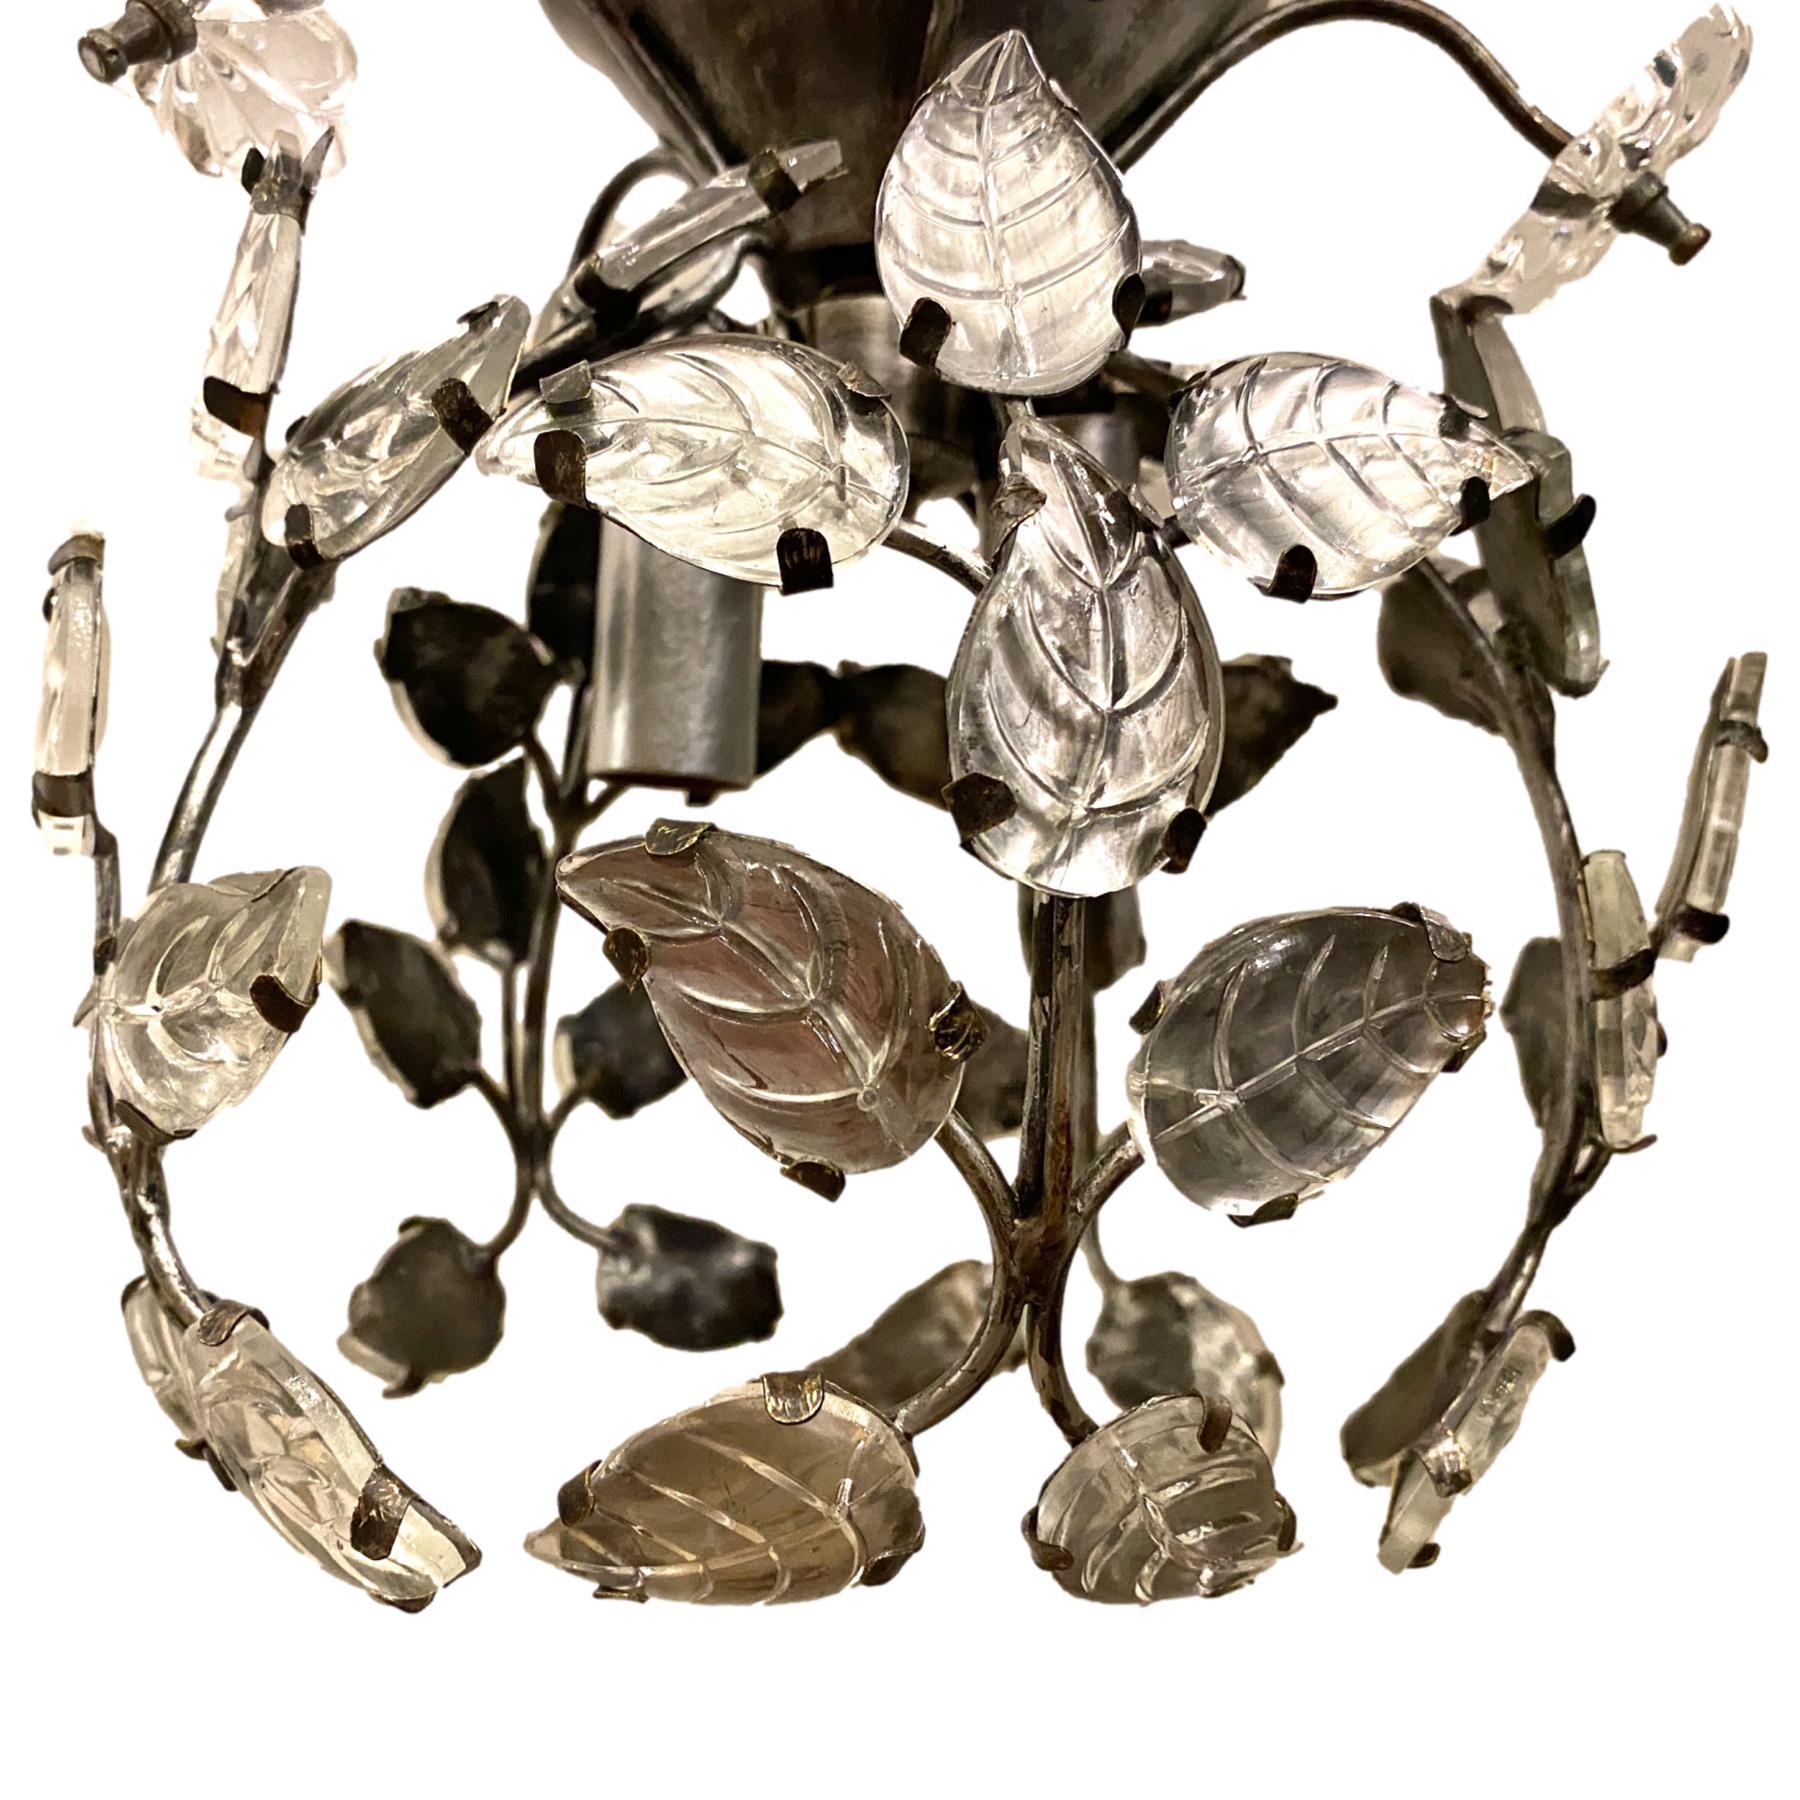 A set of seven French circa 1930's crystal silver leaf pendant light fixtures with molded glass leaves, flowers and two interior lights. Sold individually.

Measurements:
Drop: 12